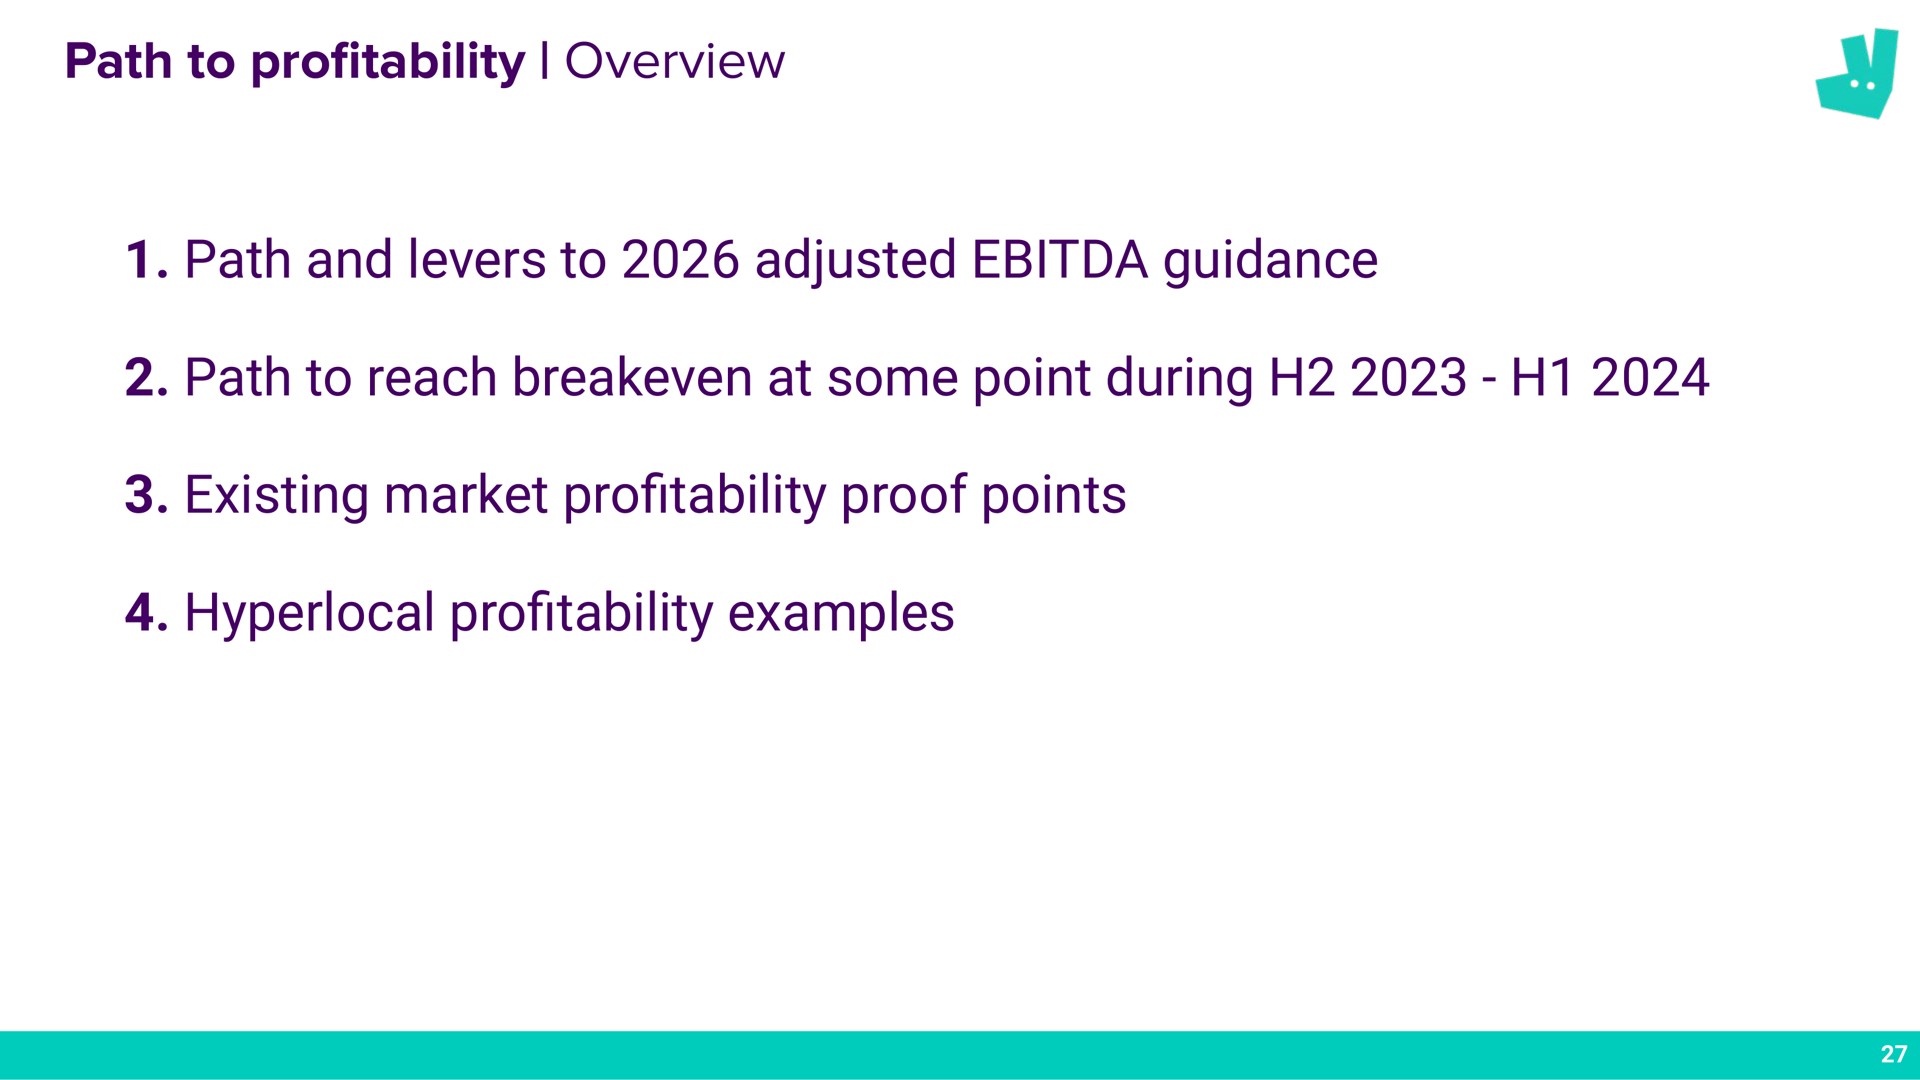 path to pro overview path and levers to adjusted guidance path to reach at some point during existing market pro proof points pro examples profitability a profitability profitability | Deliveroo